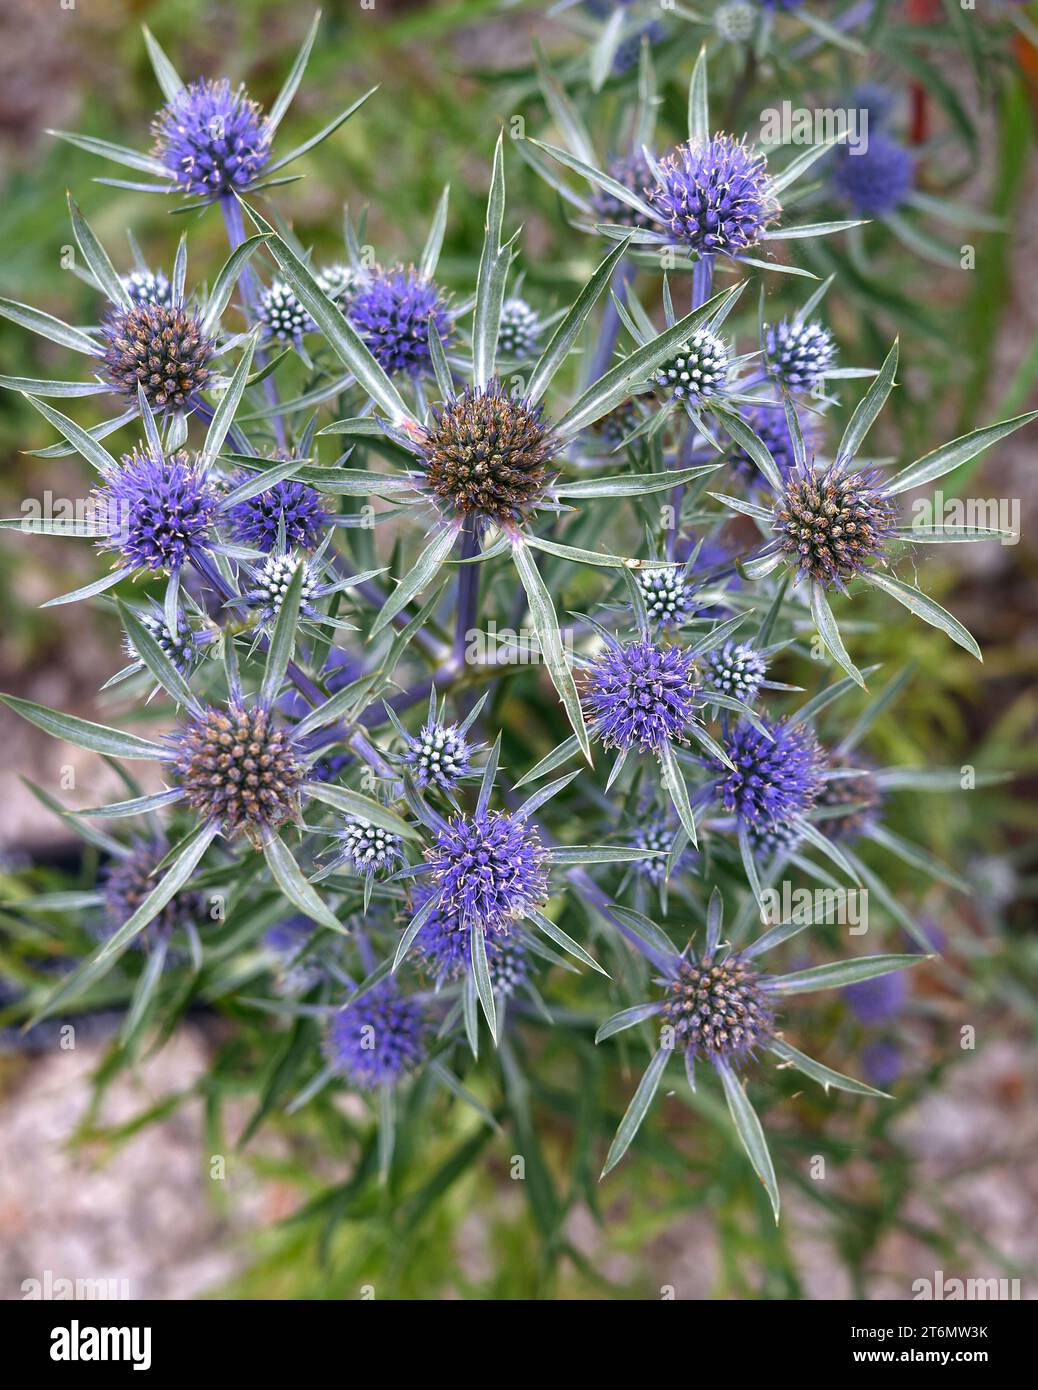 Closeup of the thistle-like flowers of the perennial garden plant eryngium amethystinum seen in late summer. Stock Photo